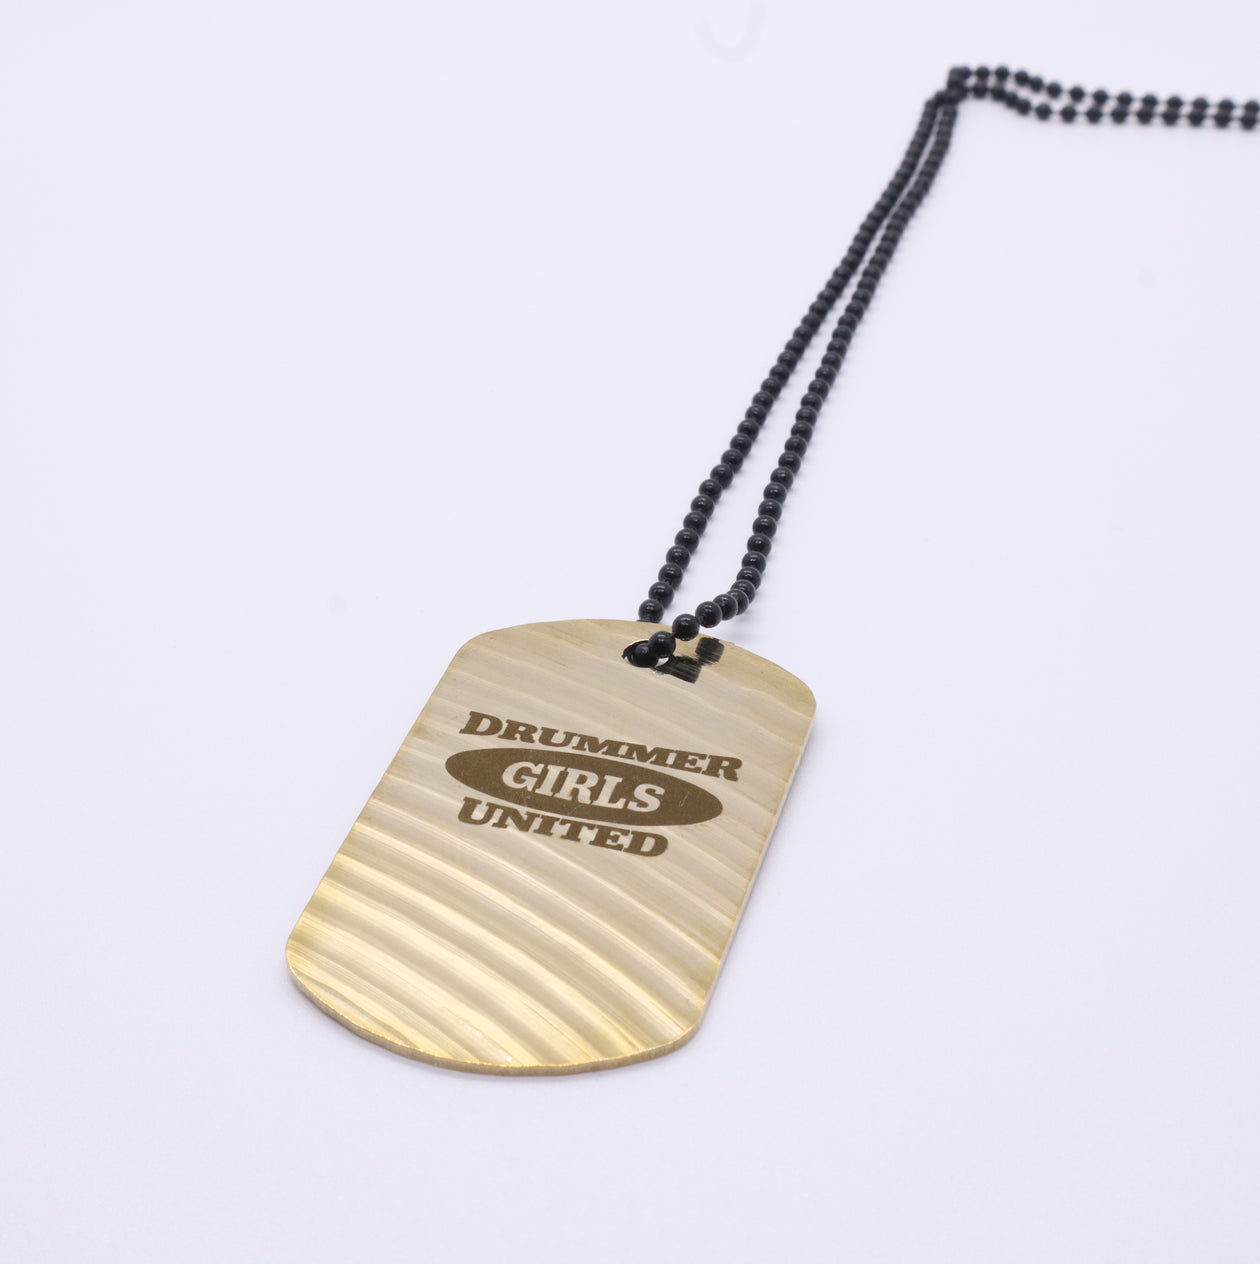 Drummer Girls United Dogtag - Reclaimed Cymbal Necklace